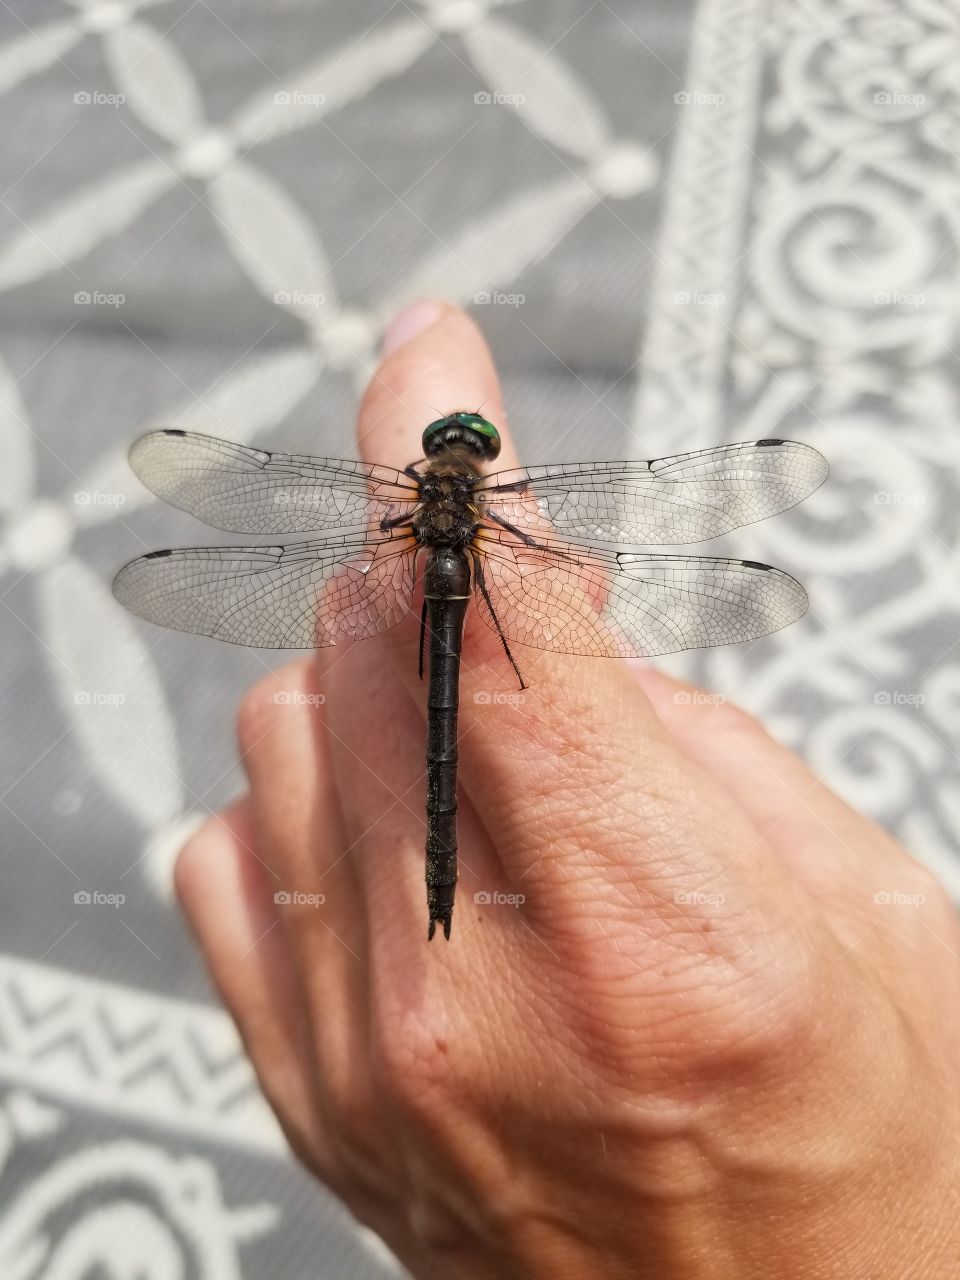 made a new friend, the dragonfly